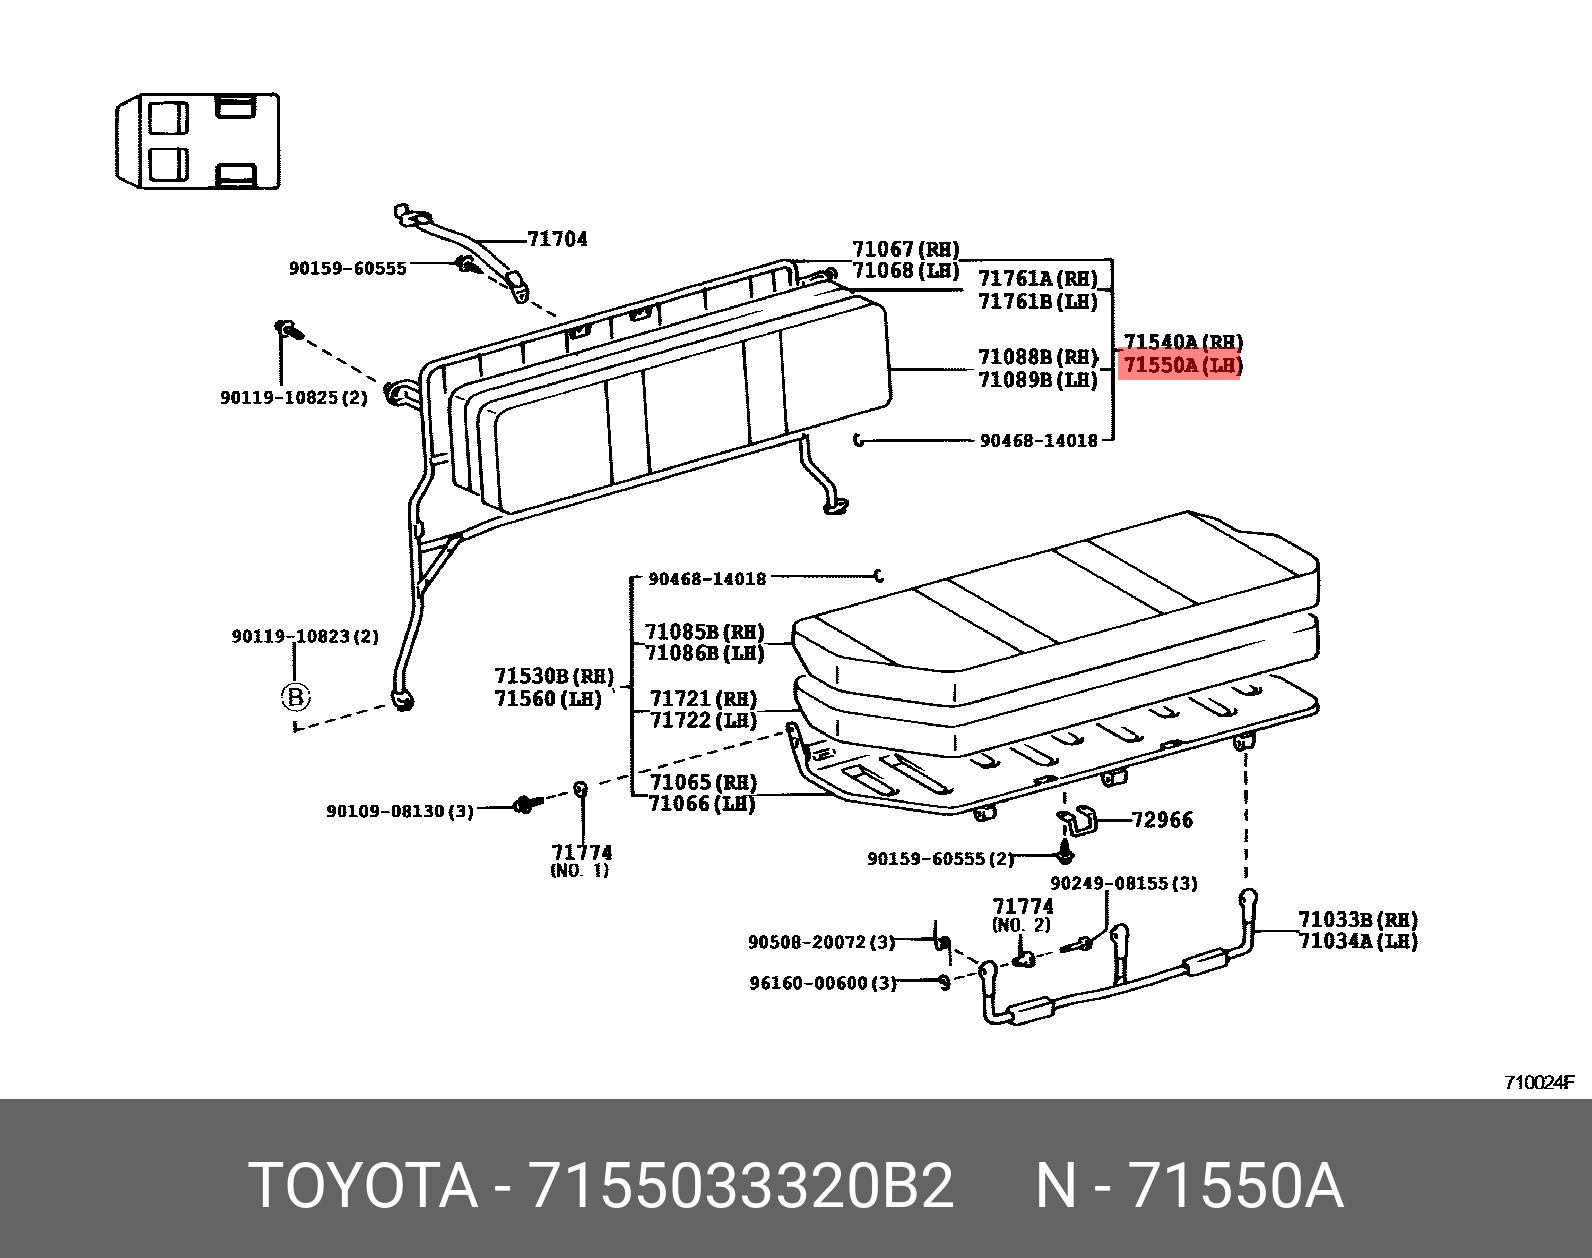 CAMRY 200109 - 200601, BACK ASSY, REAR SIDE SEAT, LH